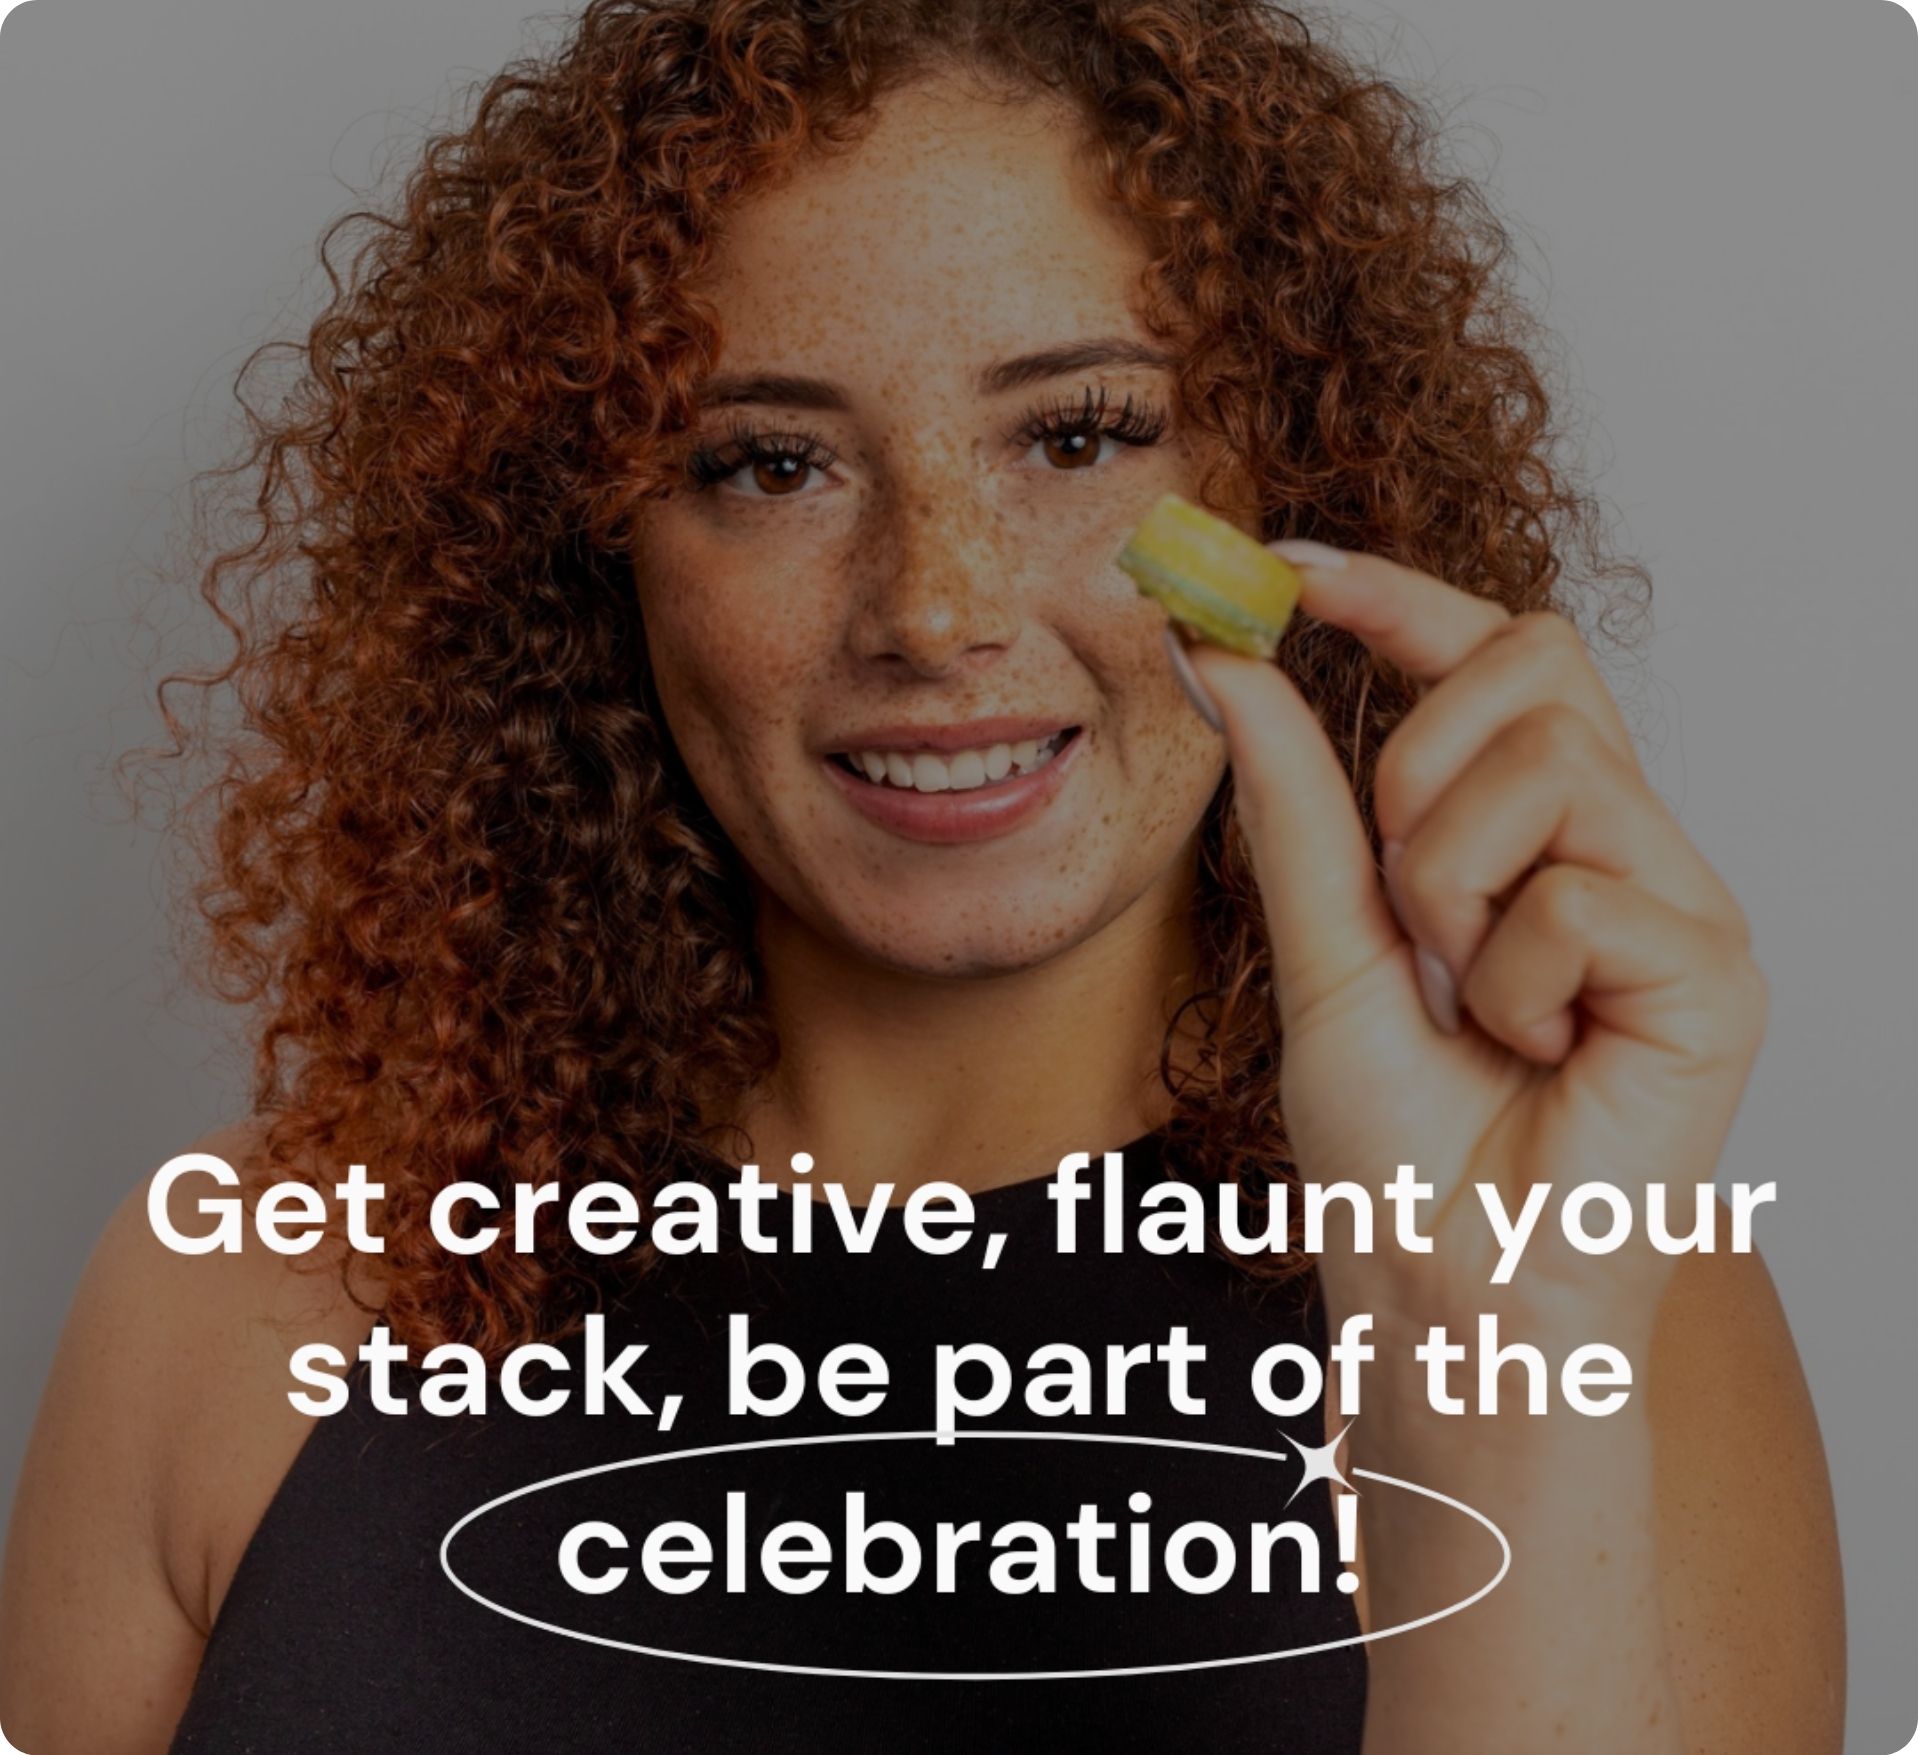 Get creative, flaunt your stack, be part of the celebration